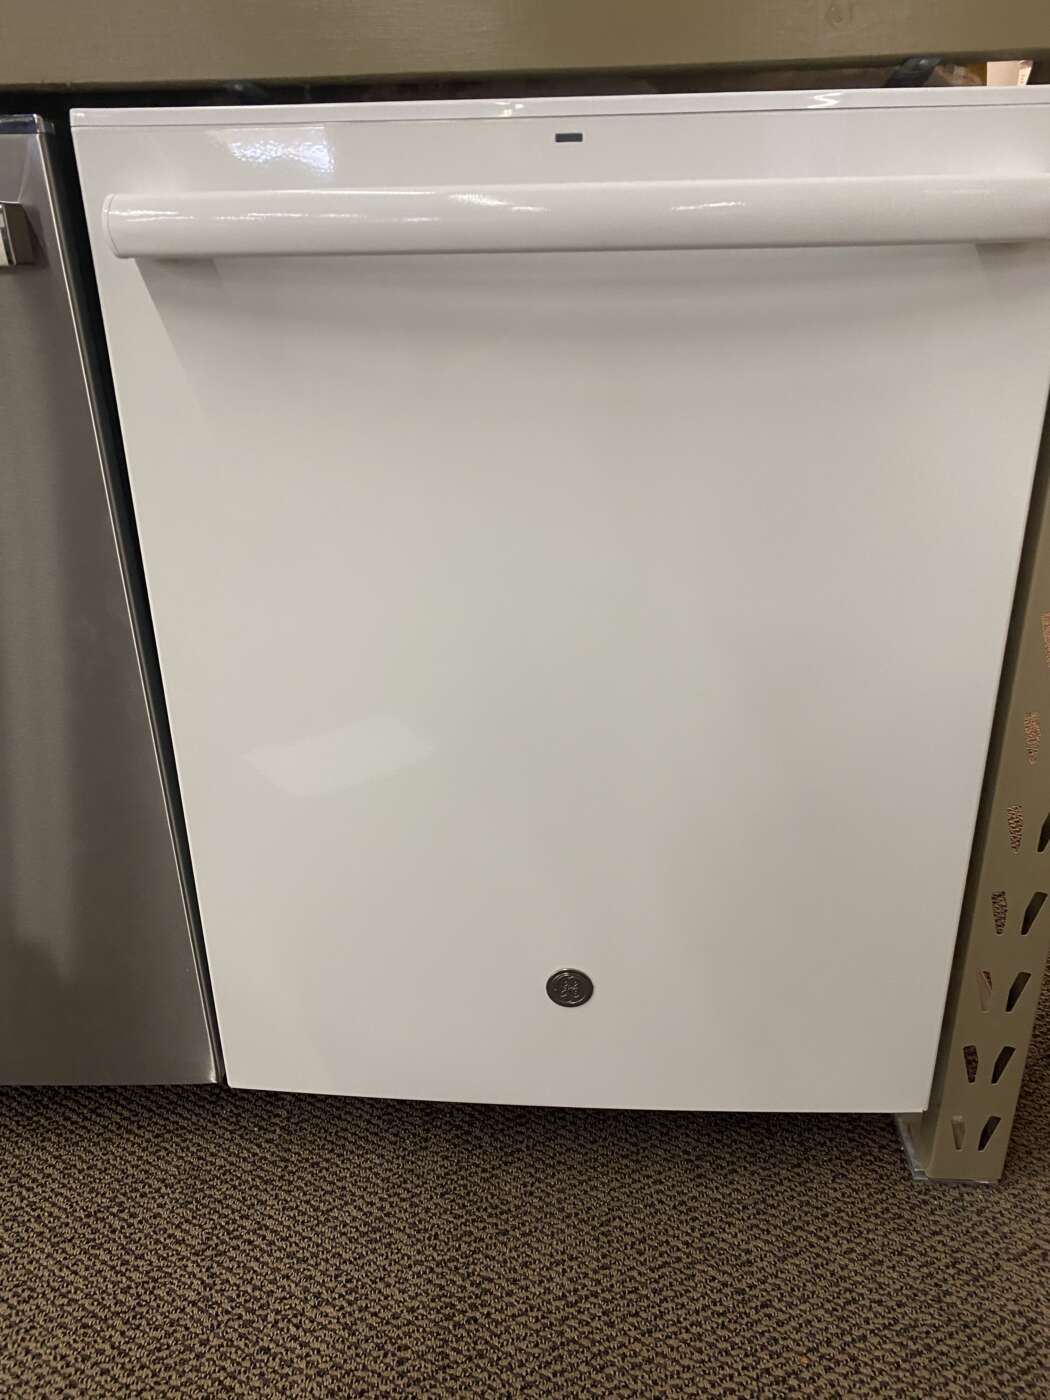 G/E White Dishwasher With Stainless Steel Tub